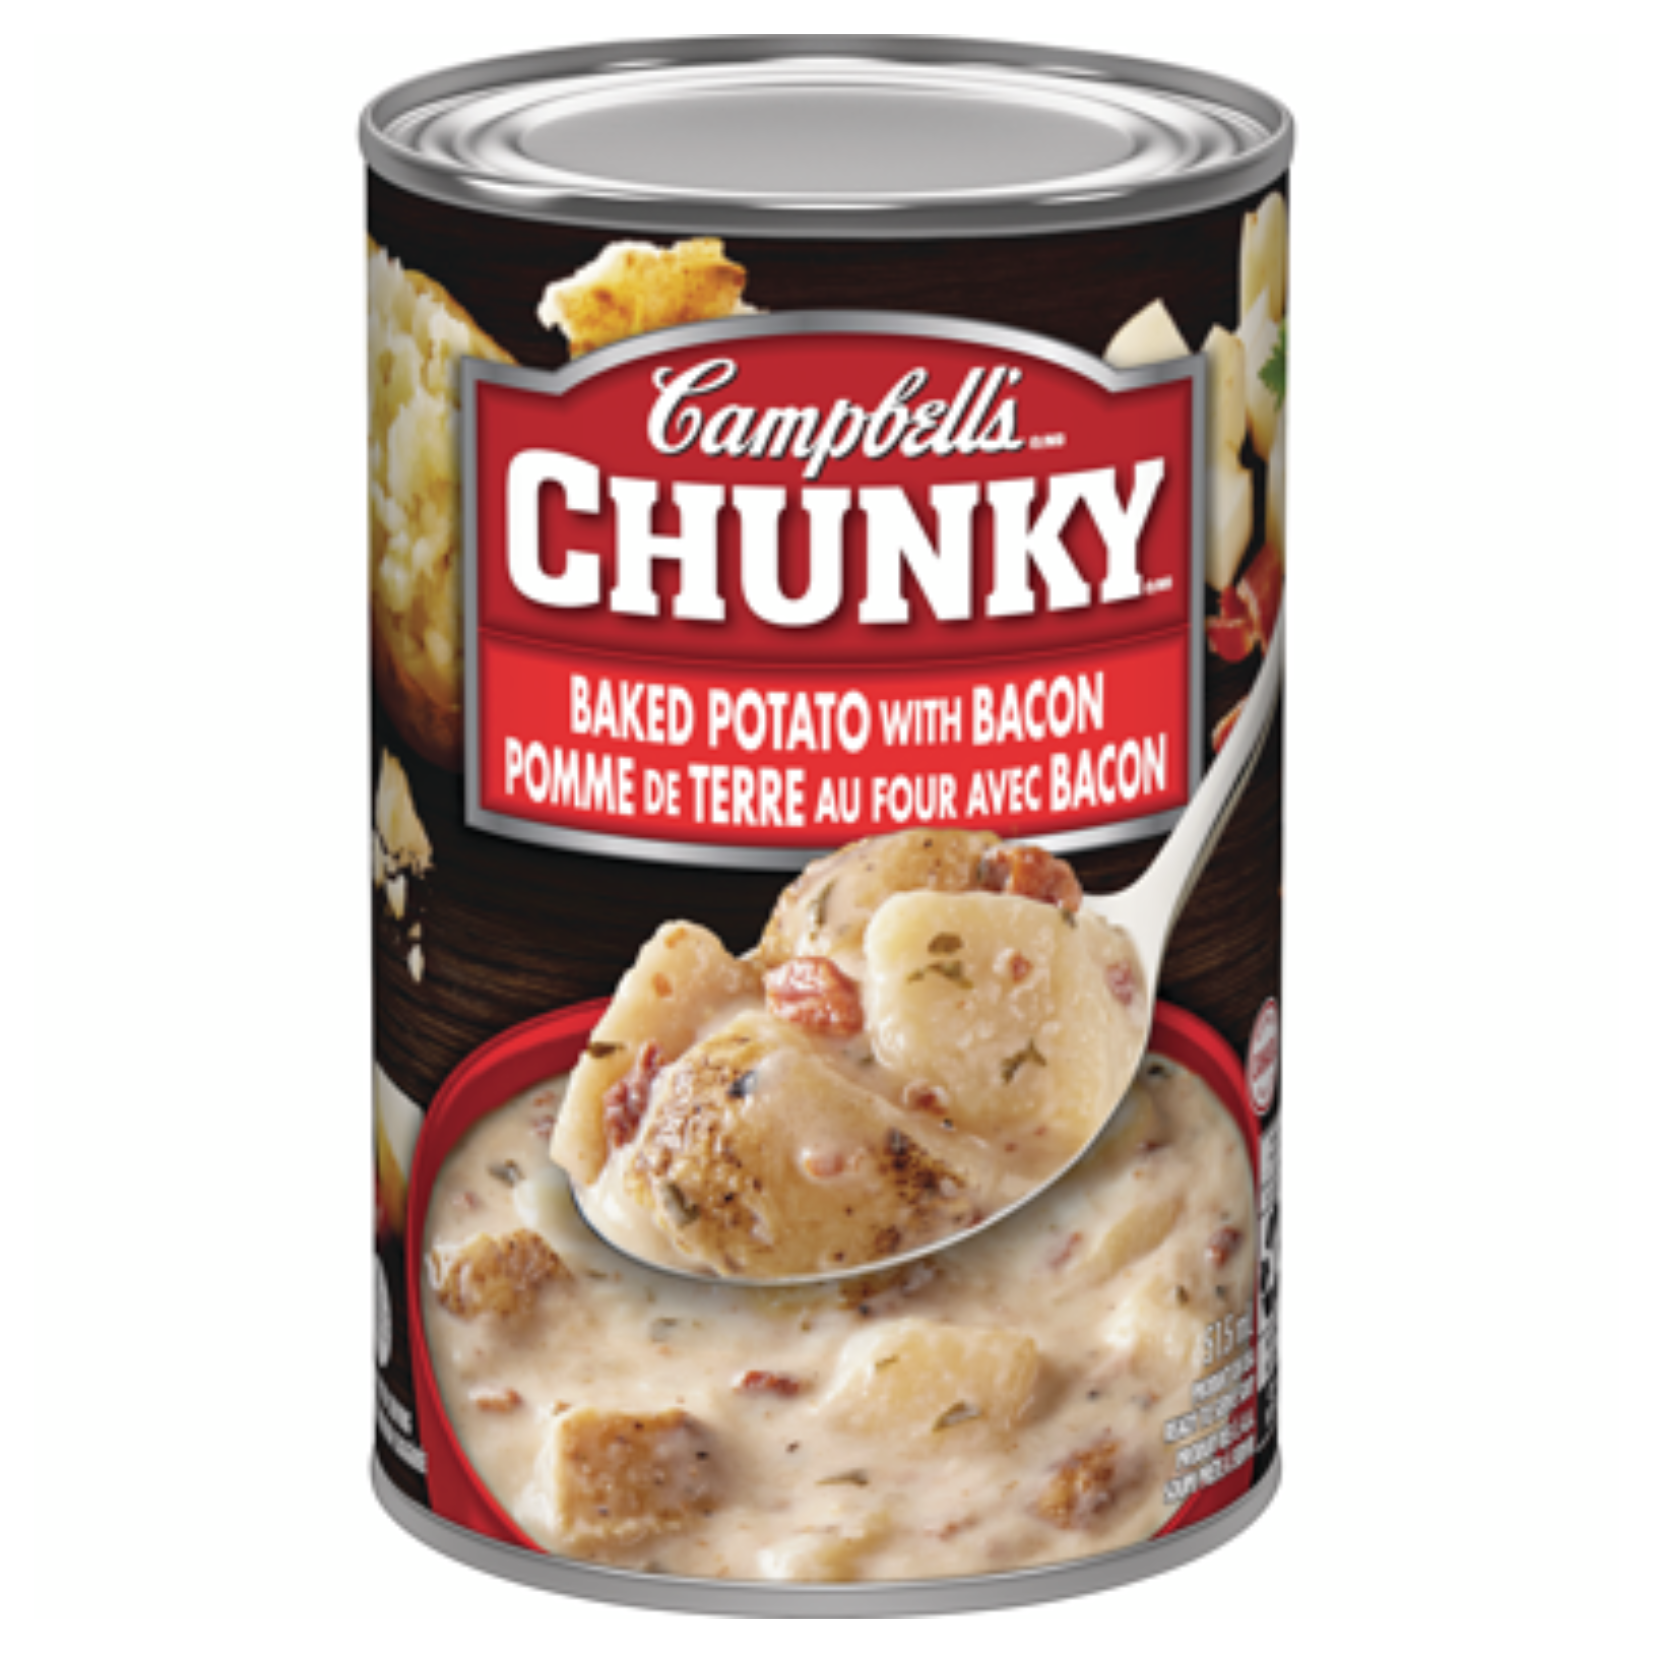 Campbell's Chunky Baked Potato With Bacon Soup 515ml